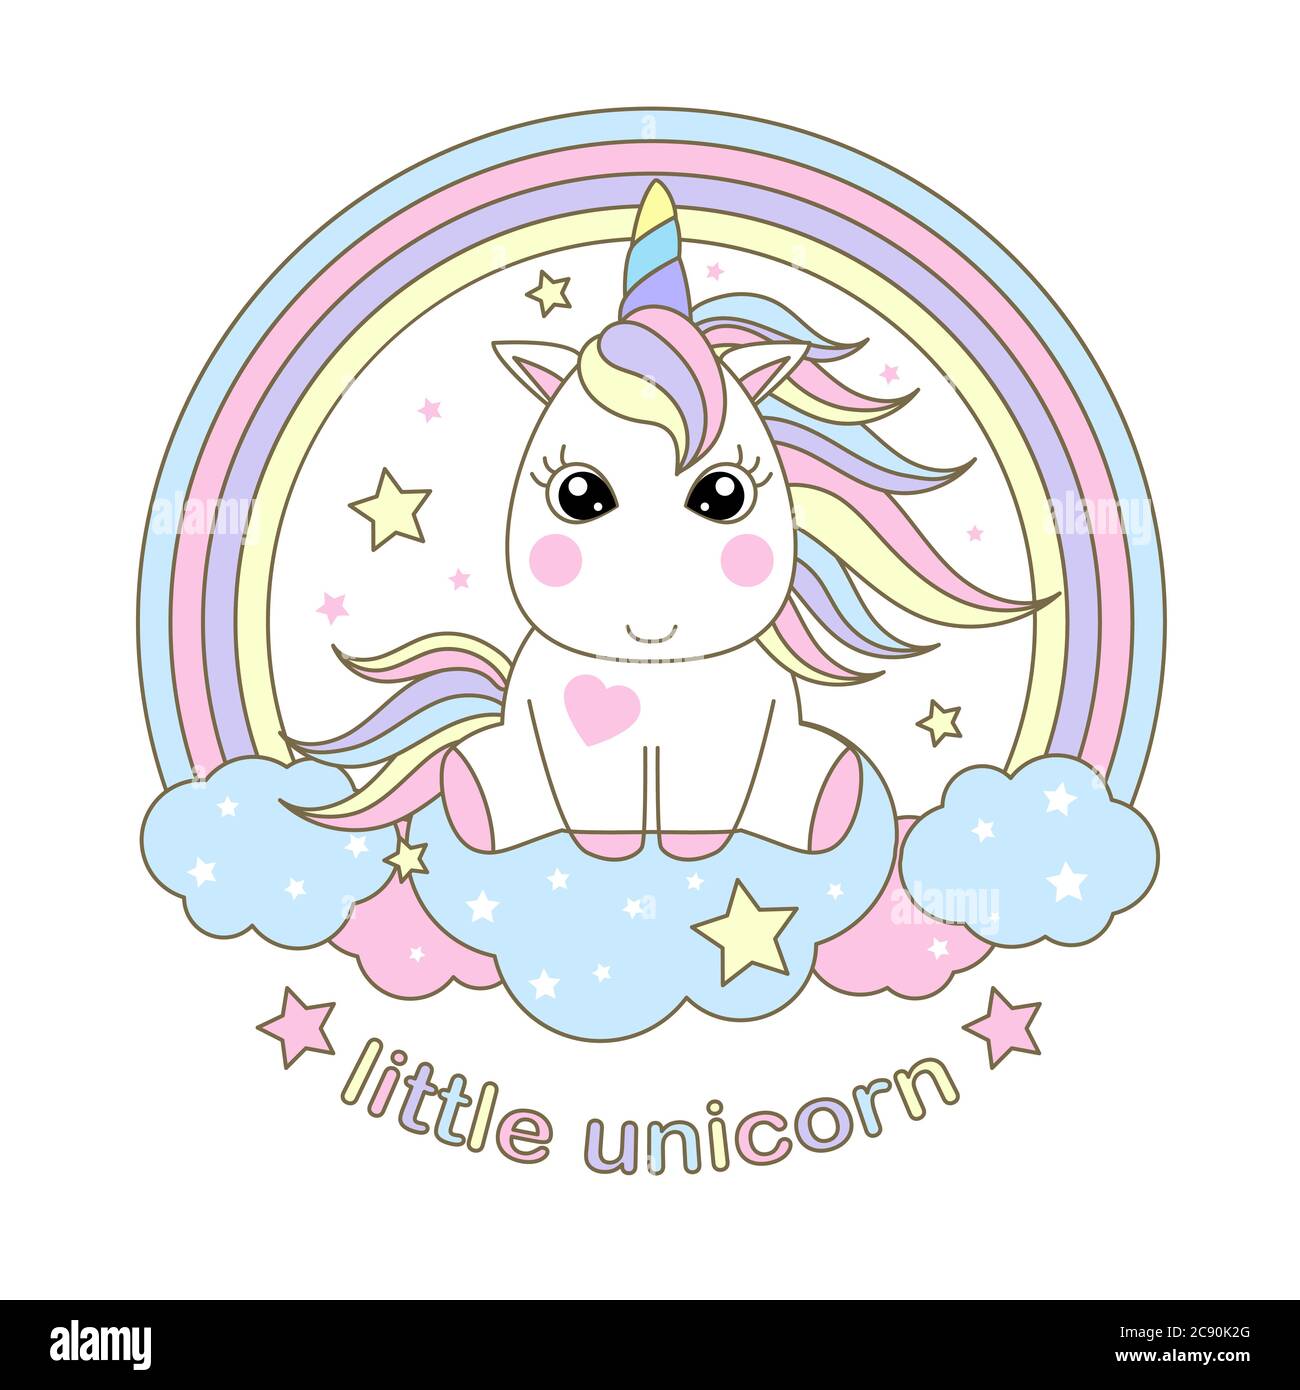 Text: Little Unicorn. A vector illustration of a pretty, white unicorn on a rainbow. For children's design prints, posters, postcards, etc. Stock Vector